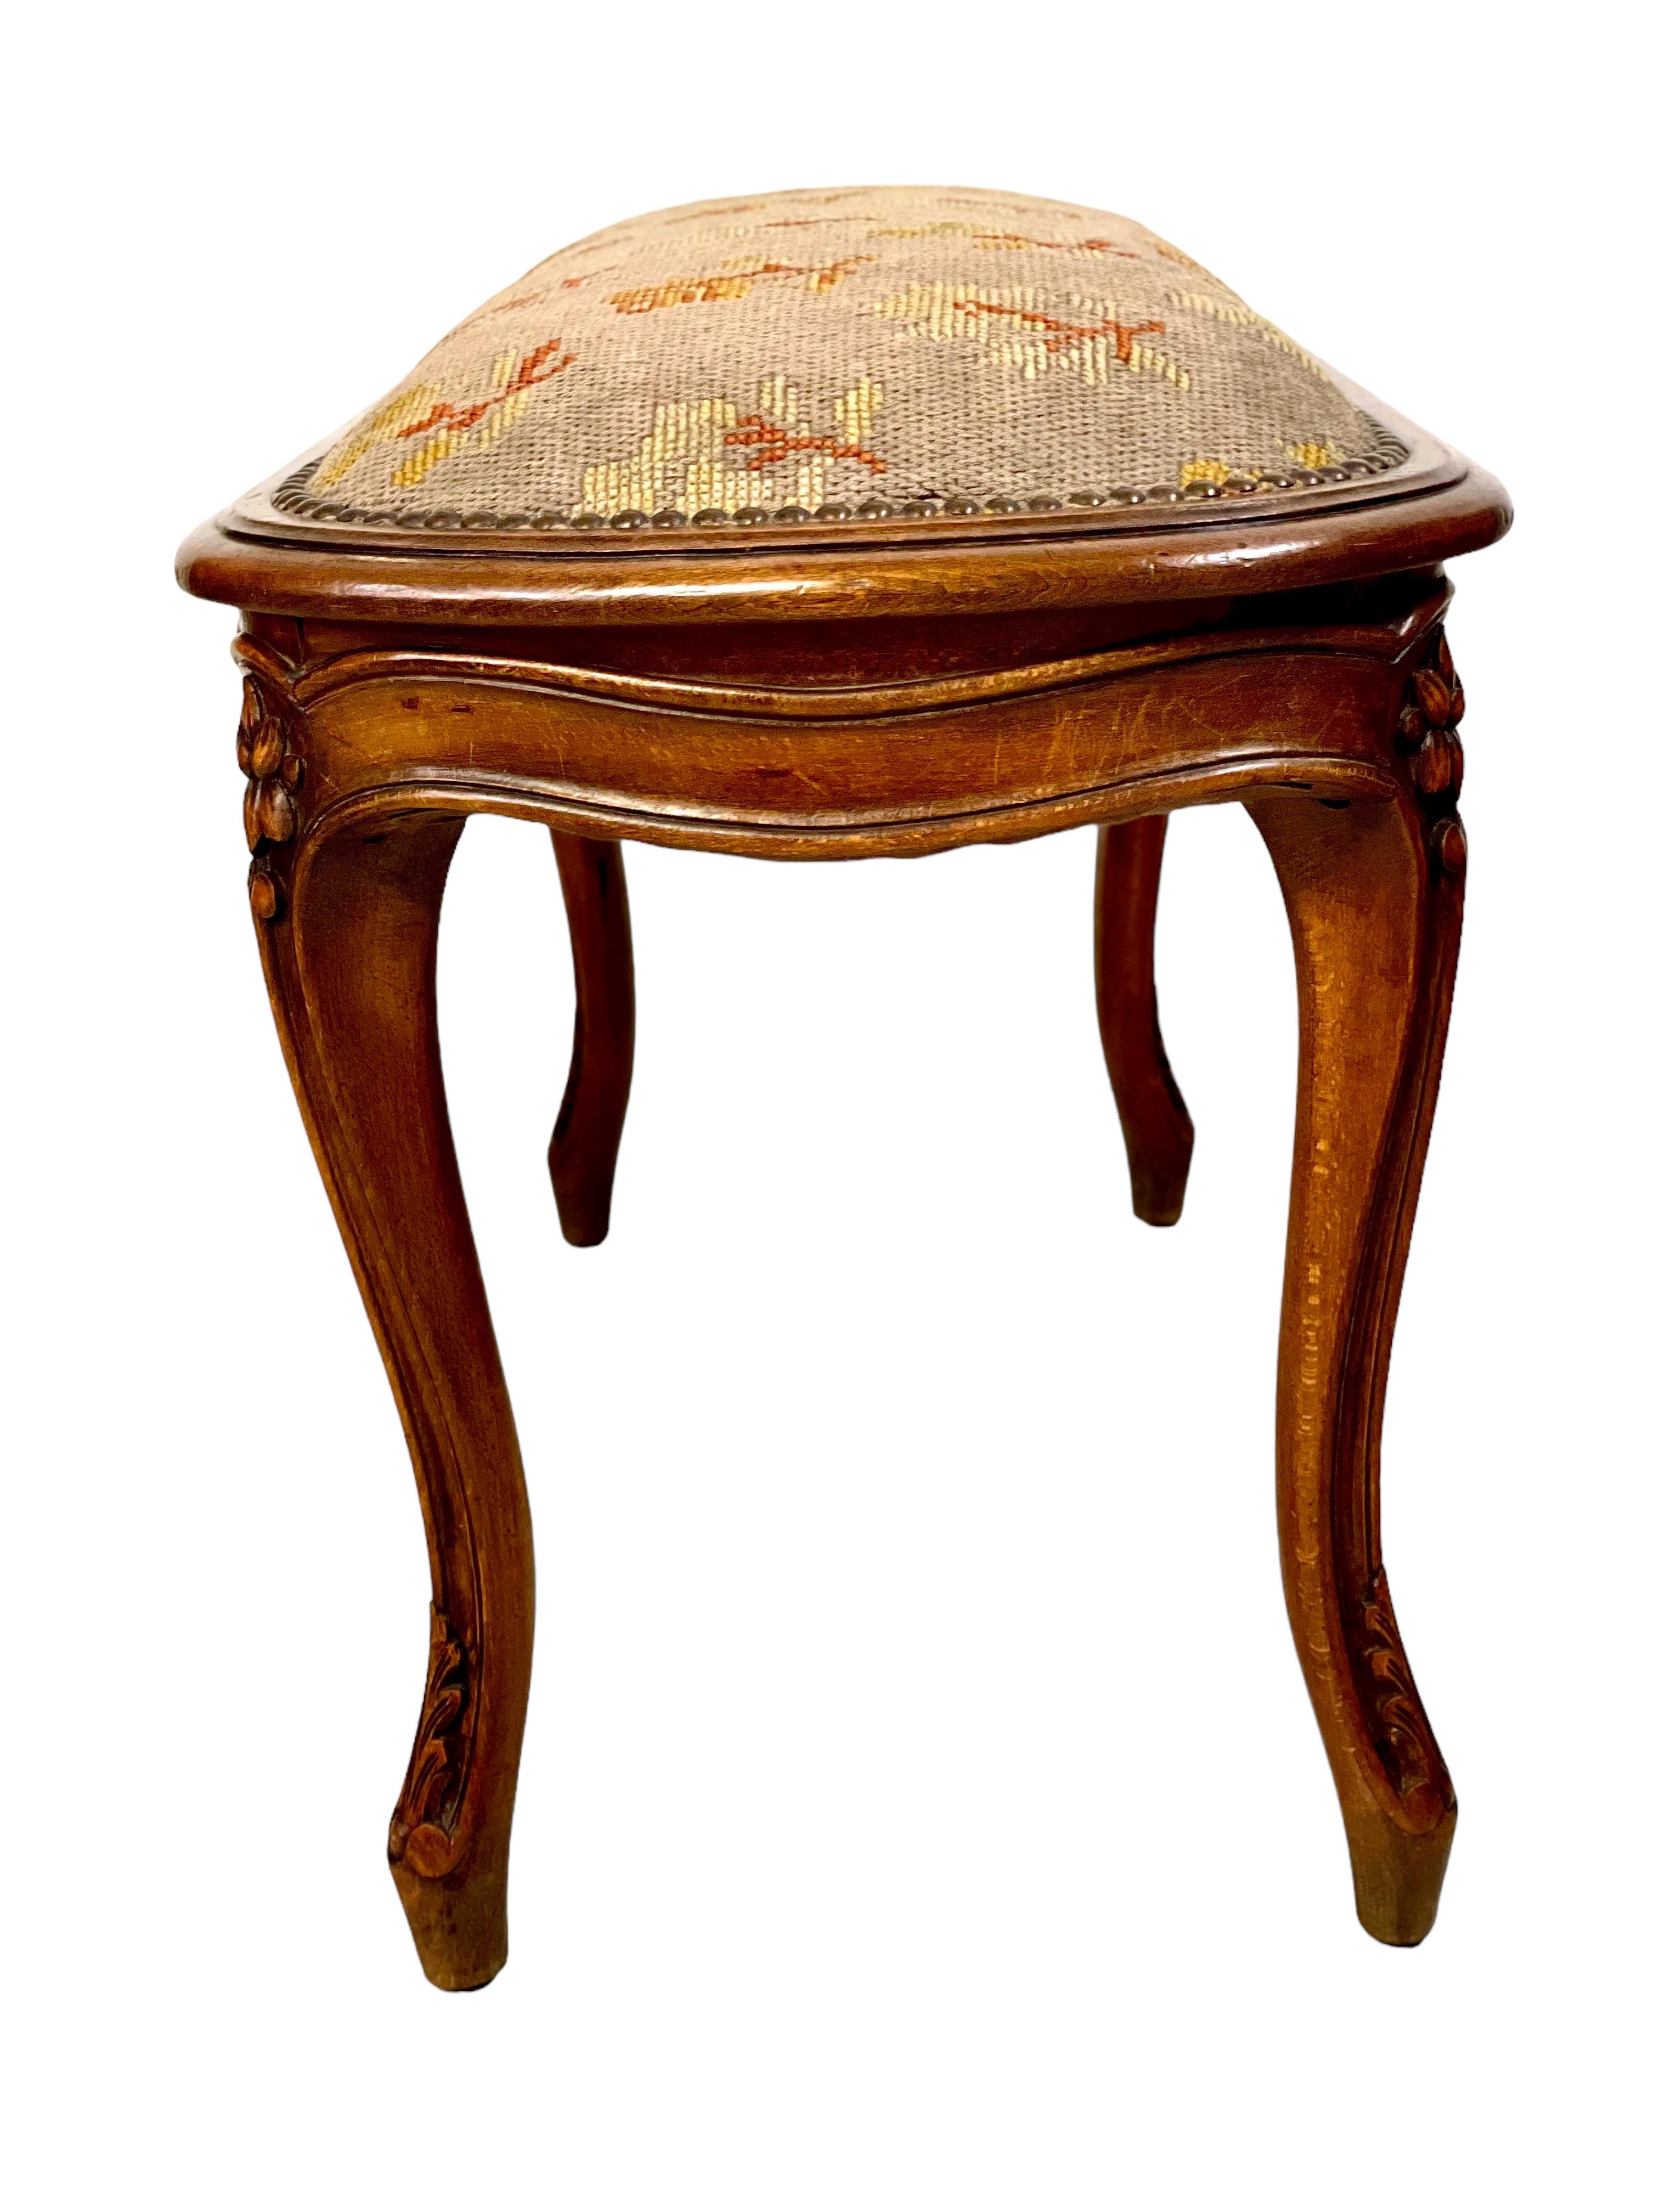 A very pretty 19th century Régence style piano stool in polished walnut, its padded cushion upholstered in a delicate needlepoint tapestry featuring a design of rosebuds and leaf sprays and secured all round with a nailhead trim. The banquette is